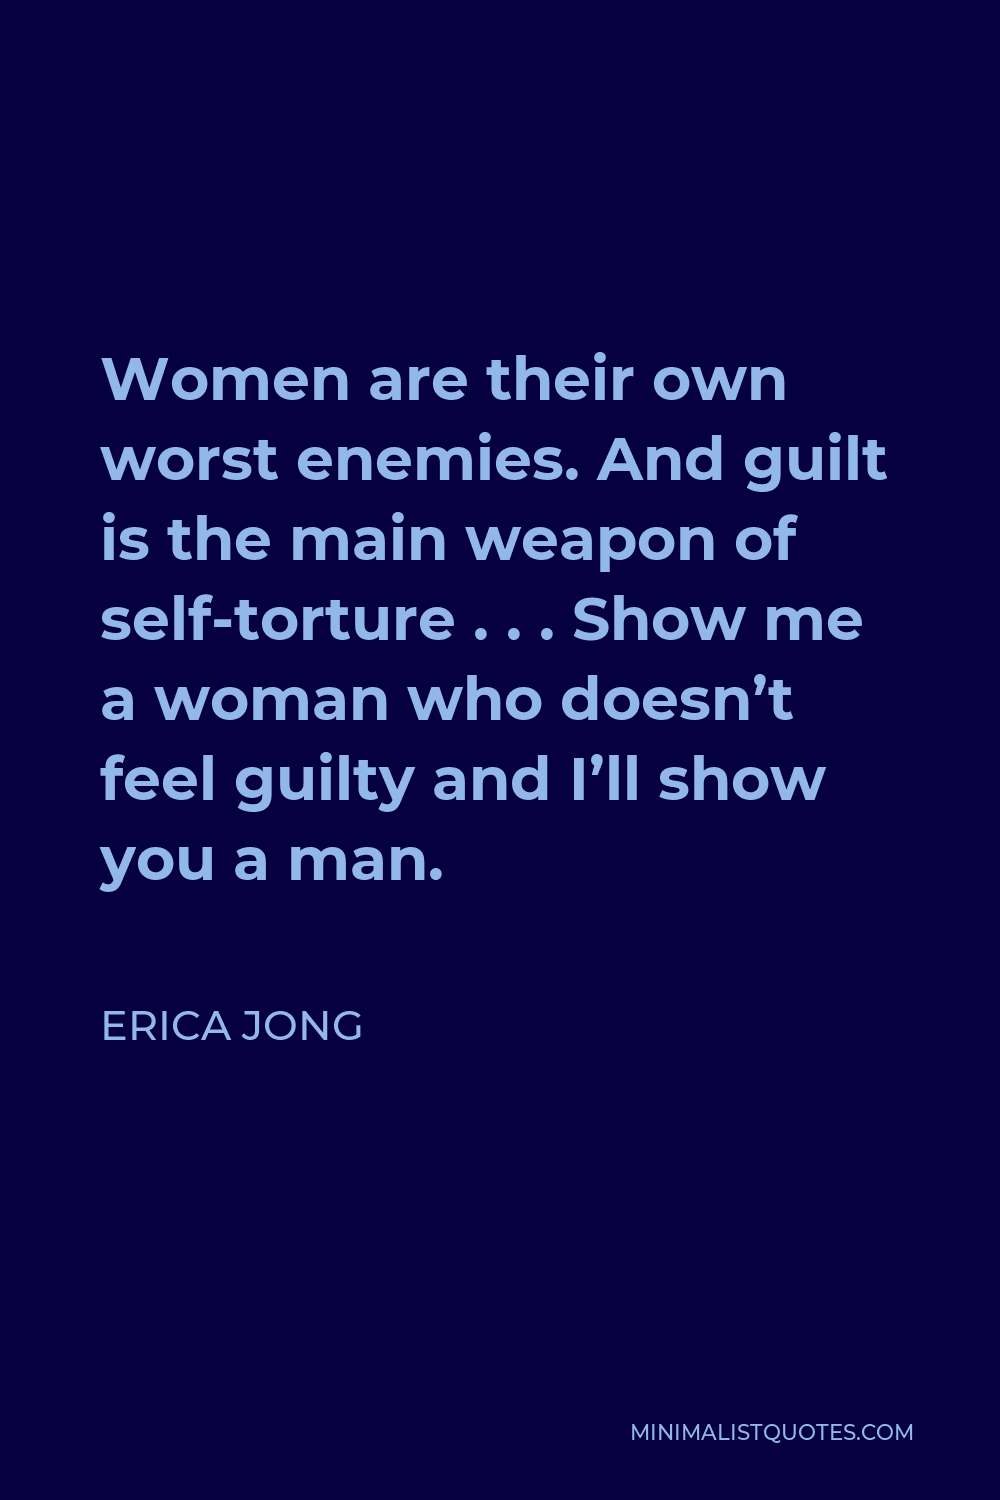 Erica Jong Quote - Women are their own worst enemies. And guilt is the main weapon of self-torture . . . Show me a woman who doesn’t feel guilty and I’ll show you a man.